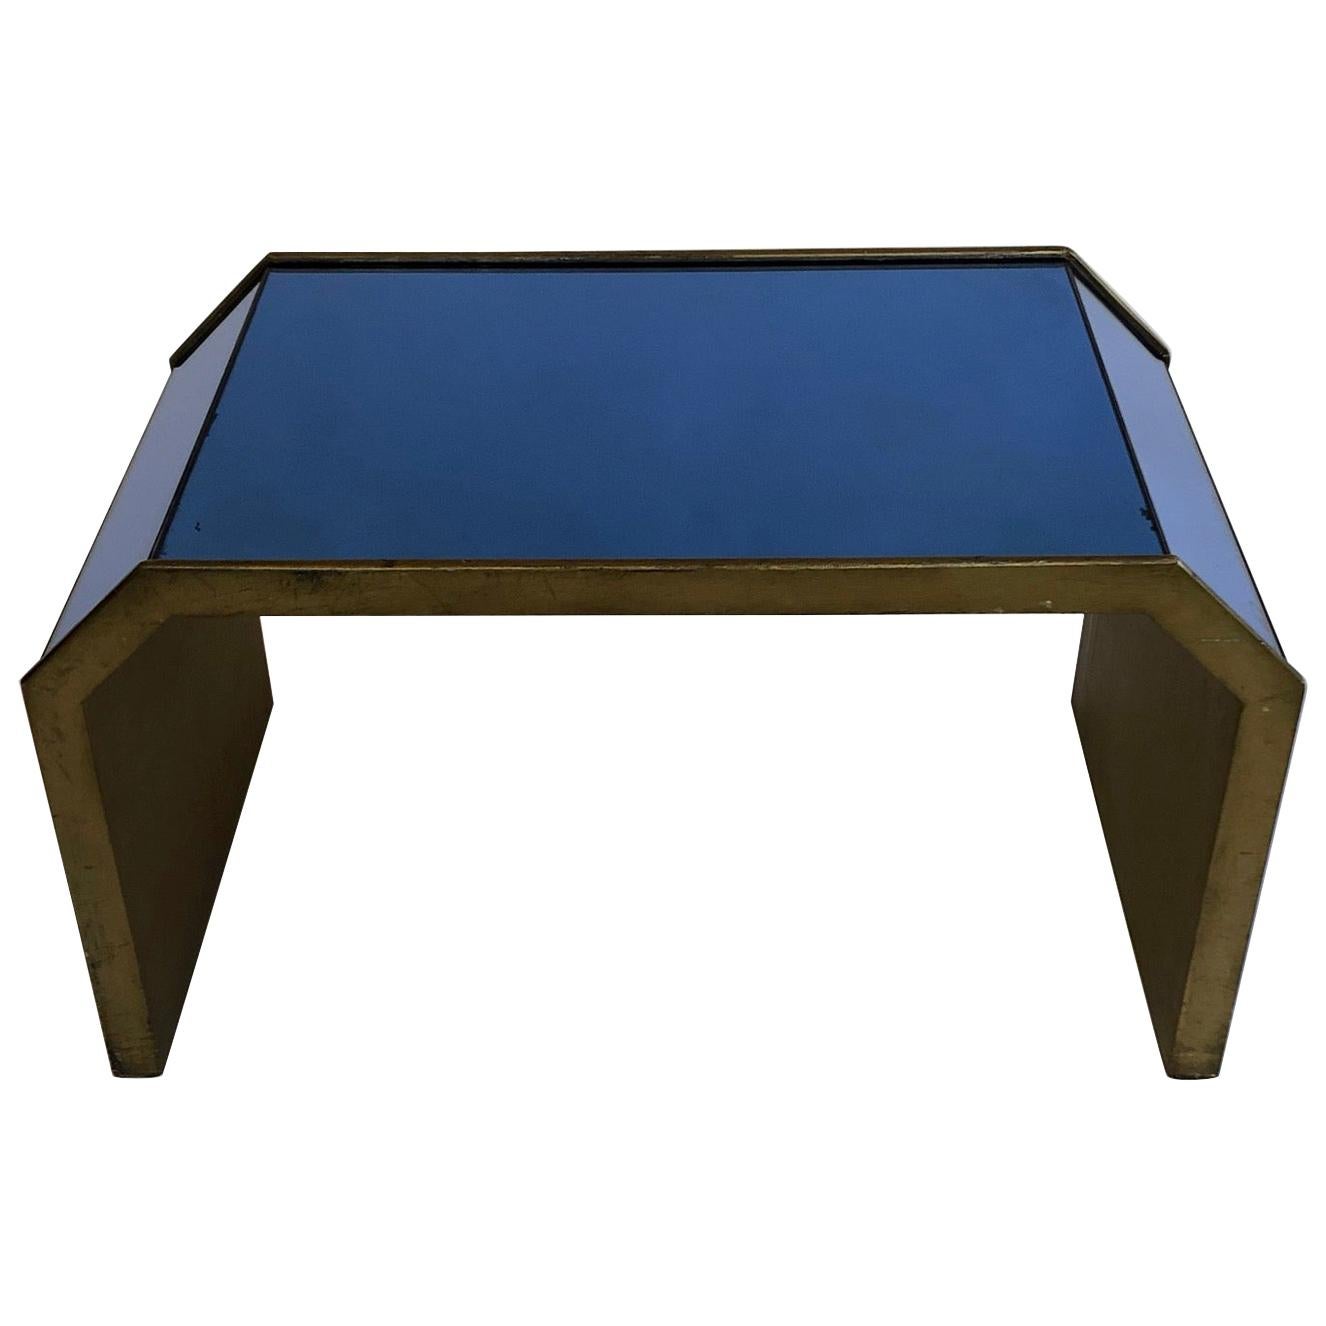 Rare and very unusual modernist 1920s-1950s deep blue mirrored side table with a gilt wooden frame. Untouched. Superb Original art deco colour, hard to come by.